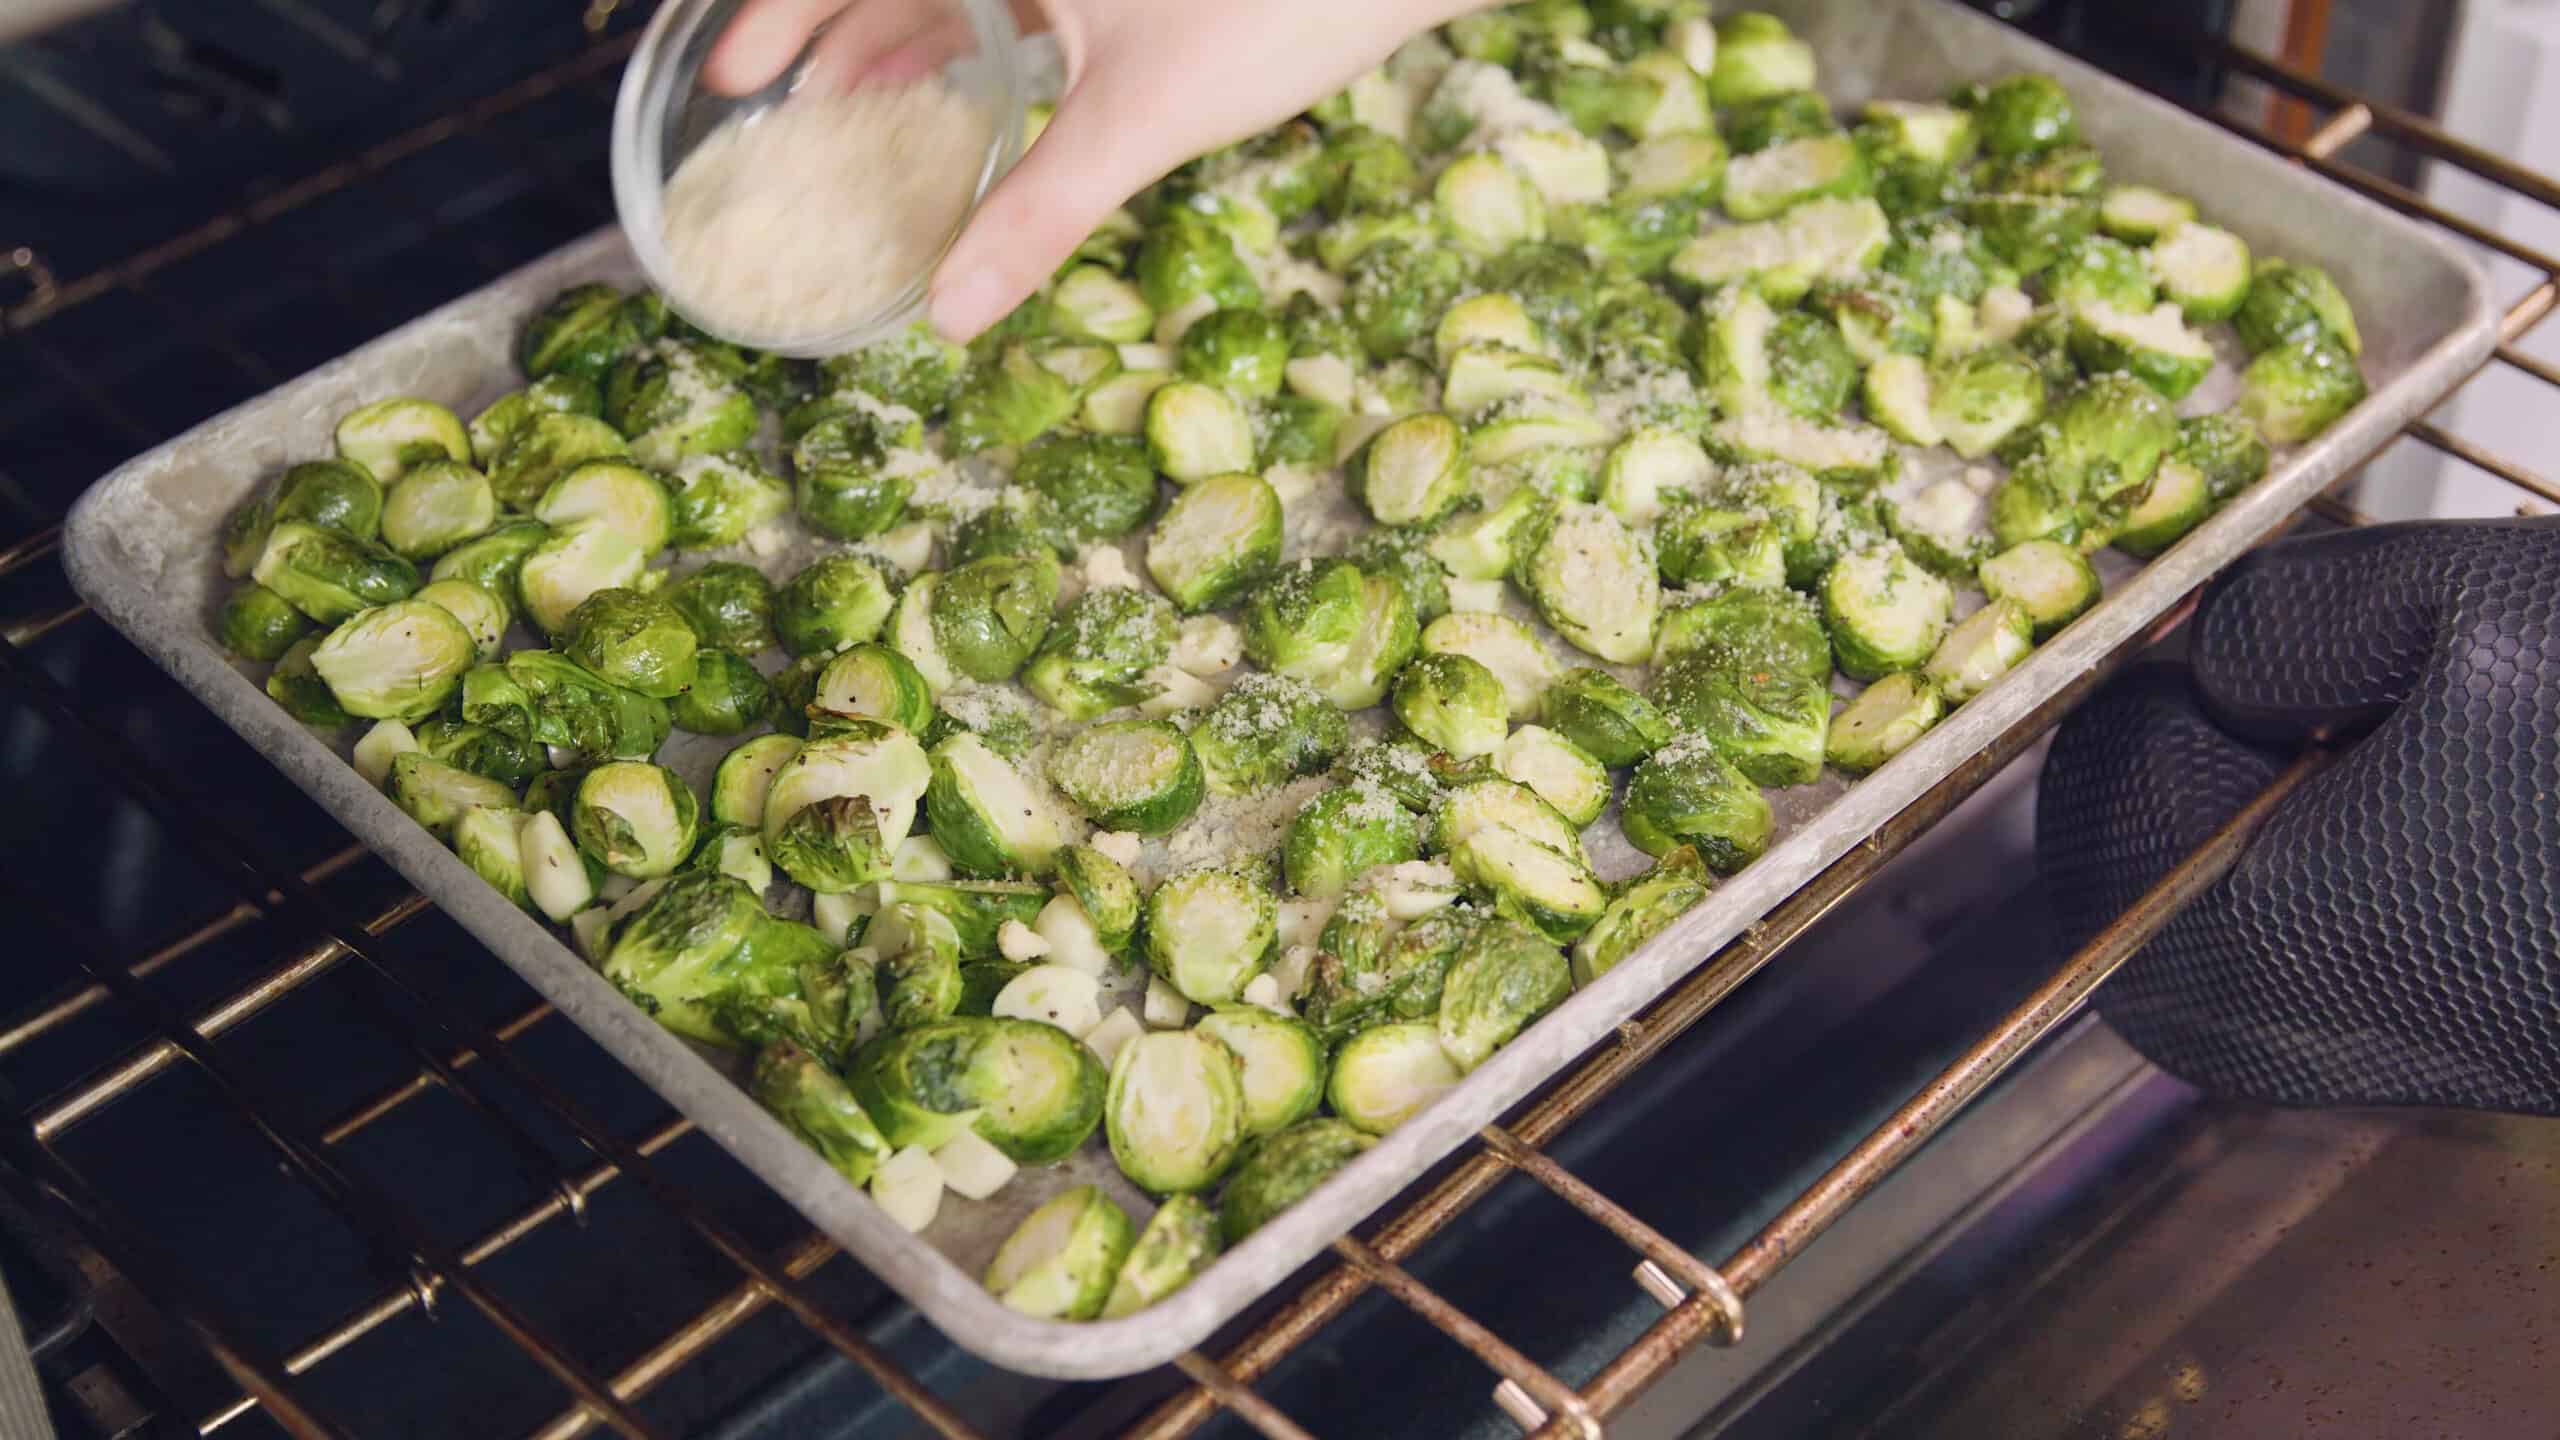 Angled view of aluminum baking sheet filled with seasoned sliced garlic and halved Brussel sprouts and grated parmesan cheese poured from a small clear glass mixing bowl on top.